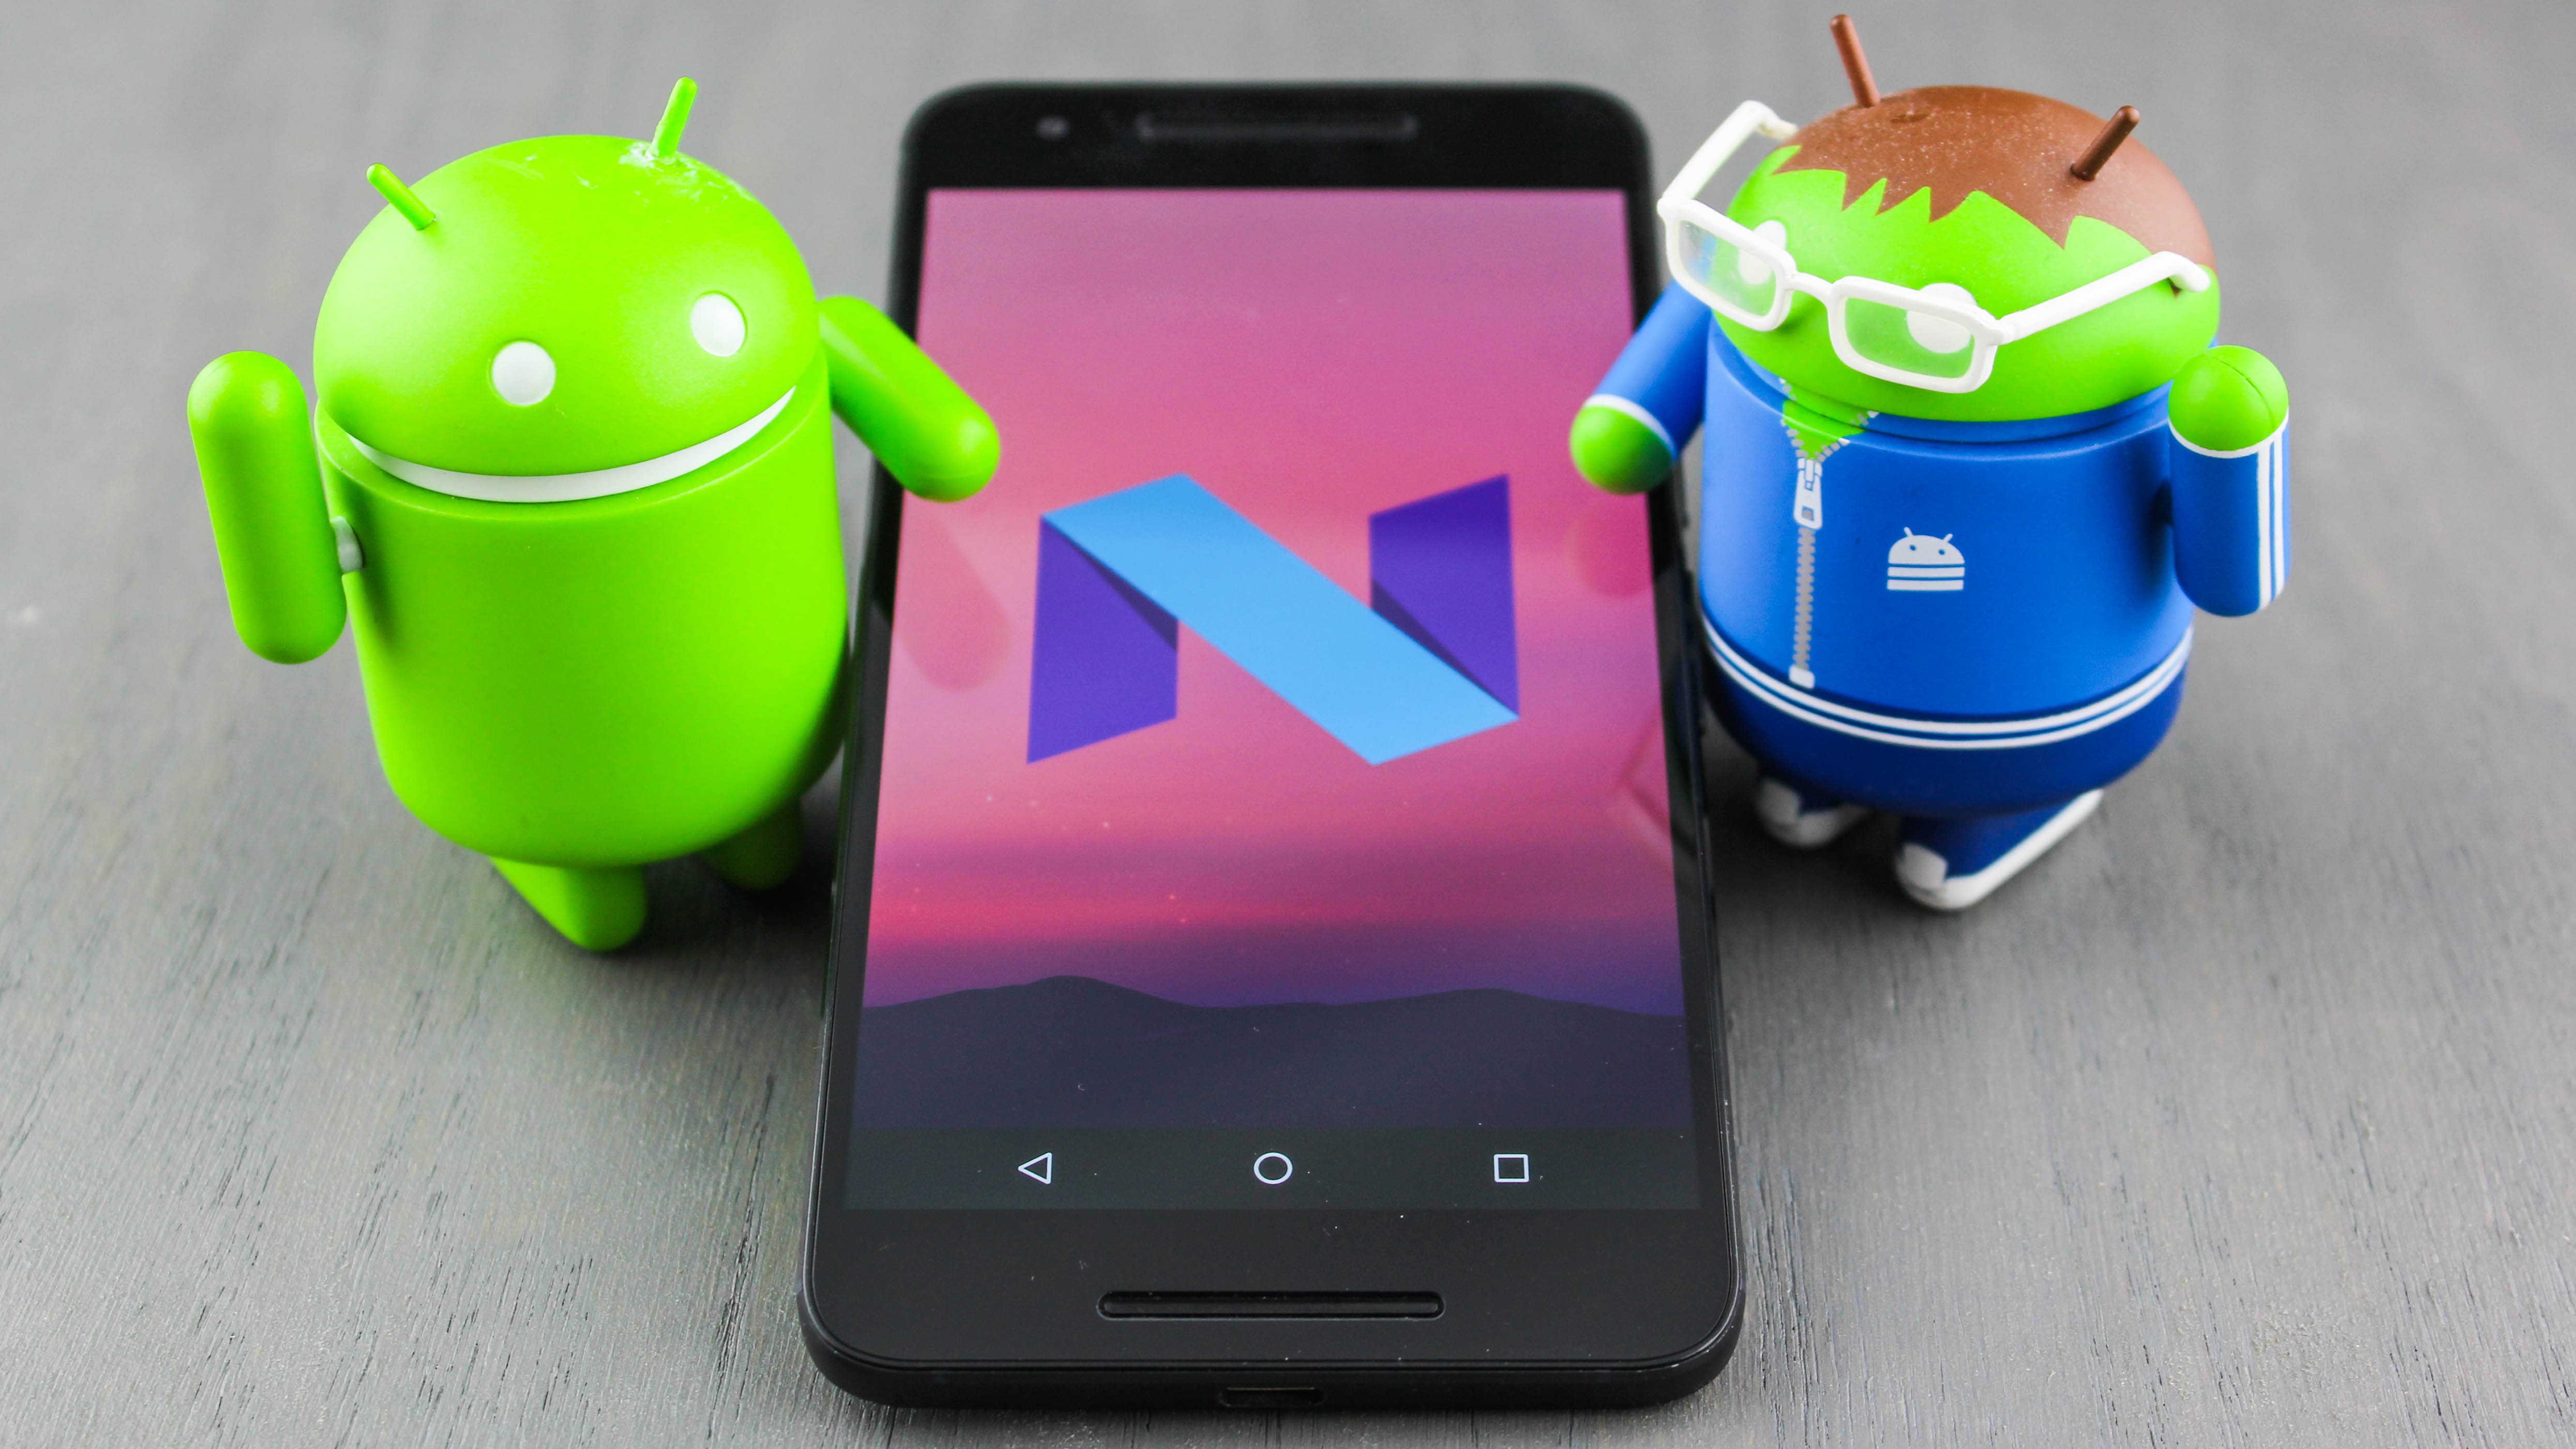 Android Backgrounds, Compatible - Android Version 7.0 Nougat - HD Wallpaper 